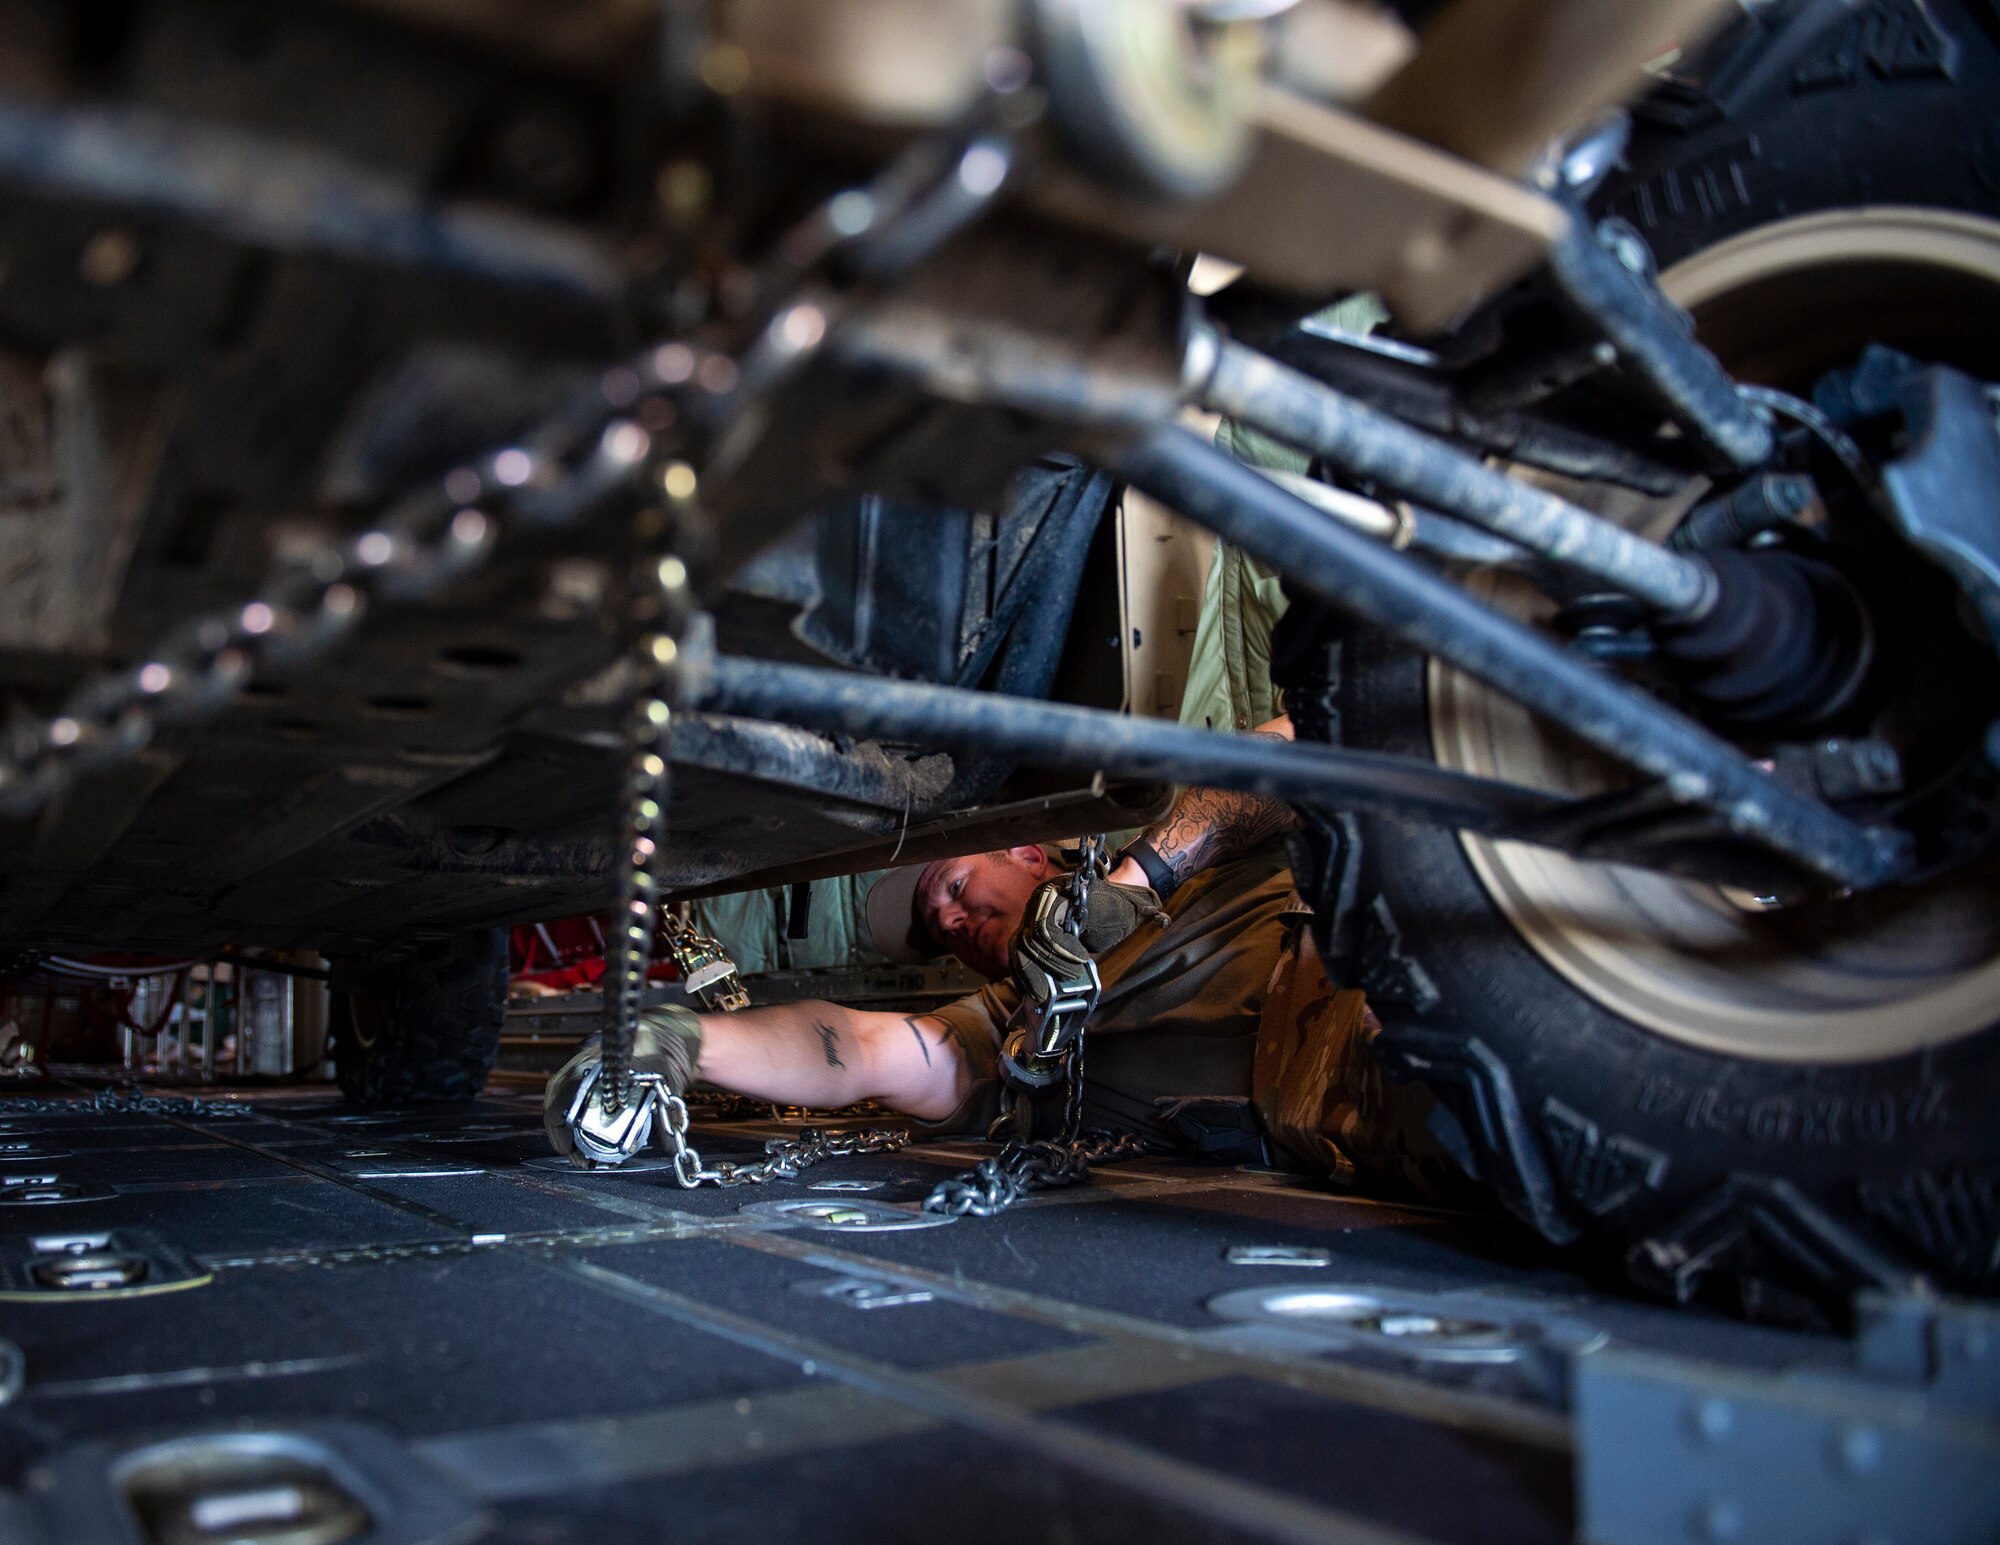 U.S. Air Force Master Sgt. James Cain, 136th Contingency Response Flight, Texas Air National Guard, securities the light tactical all-terrain vehicle (MZRZ) in a C-130 Hercules from the Minnesota Air National Guard in St. Croix, Virgin Islands, Aug. 17, 2021.